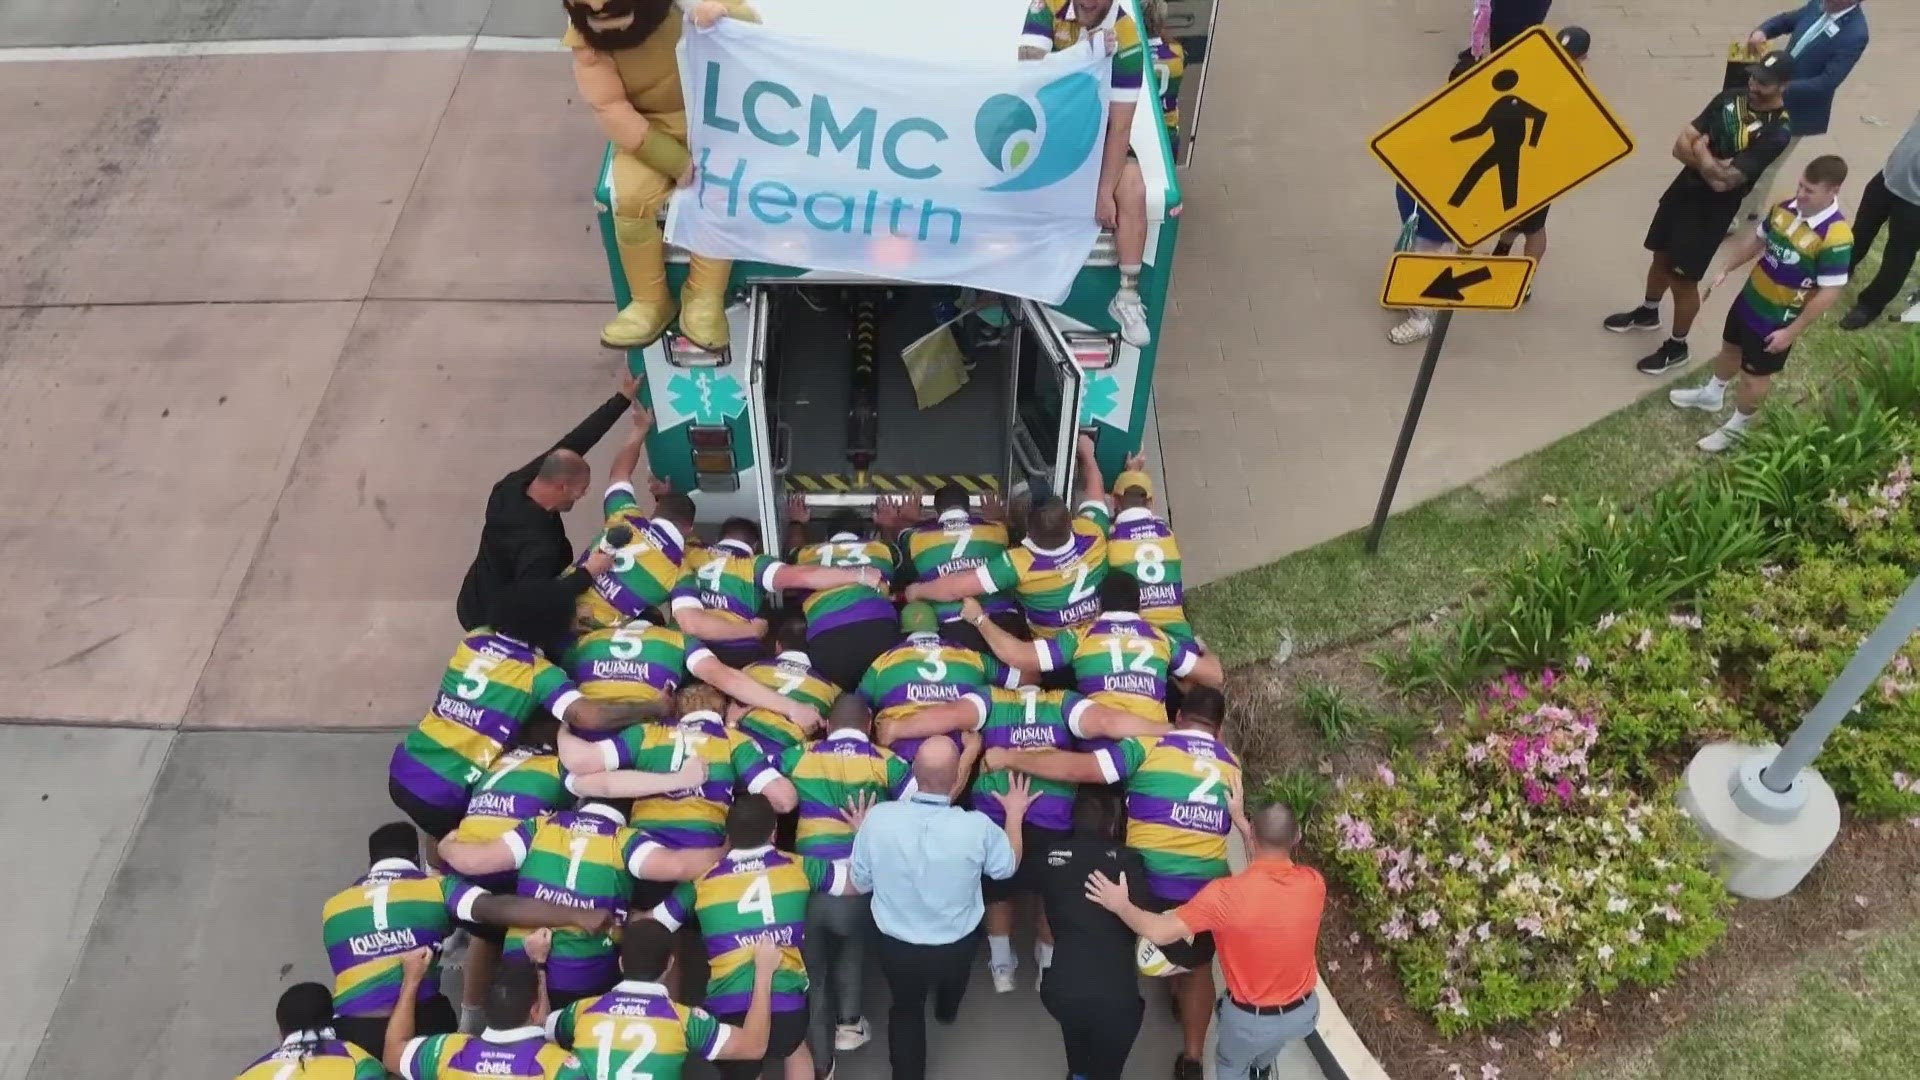 The NOLA Rugby team pushed a medical van to raise money for Children's Hospital.